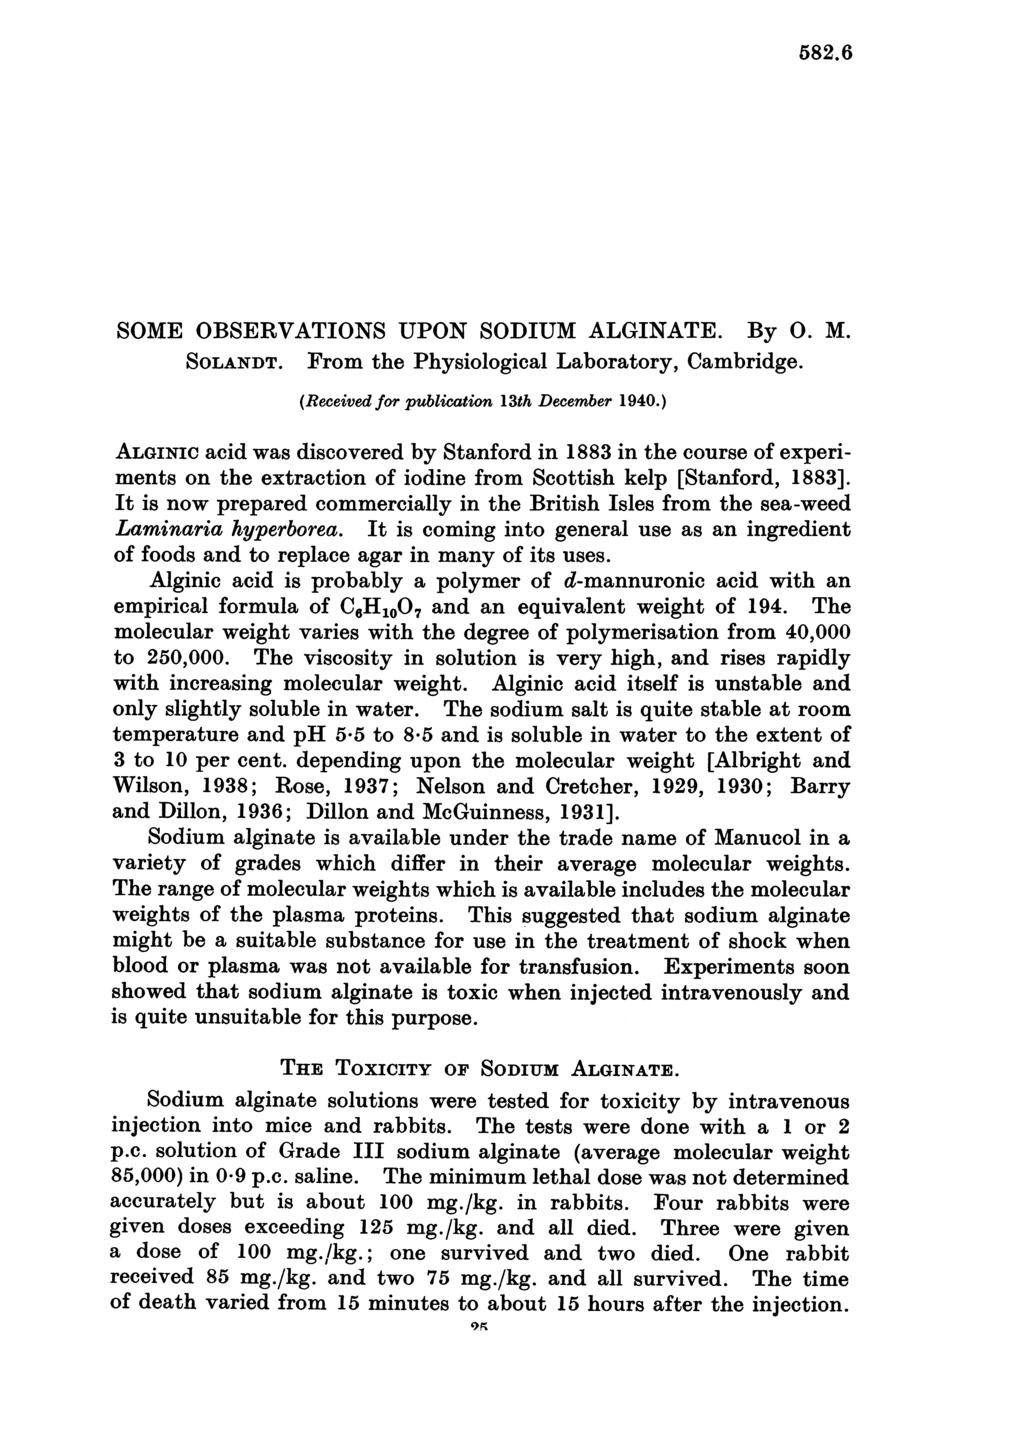 582.6 SOME OBSERVATIONS UPON SODIUM ALGINATE. By 0. M. SOLANDT. From the Physiological Laboratory, Cambridge. (Received for publication 13th December 1940.